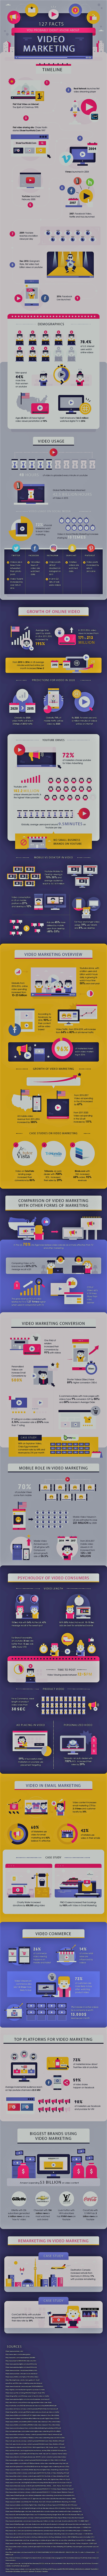 127 Facts about Video Marketing (Infographic)